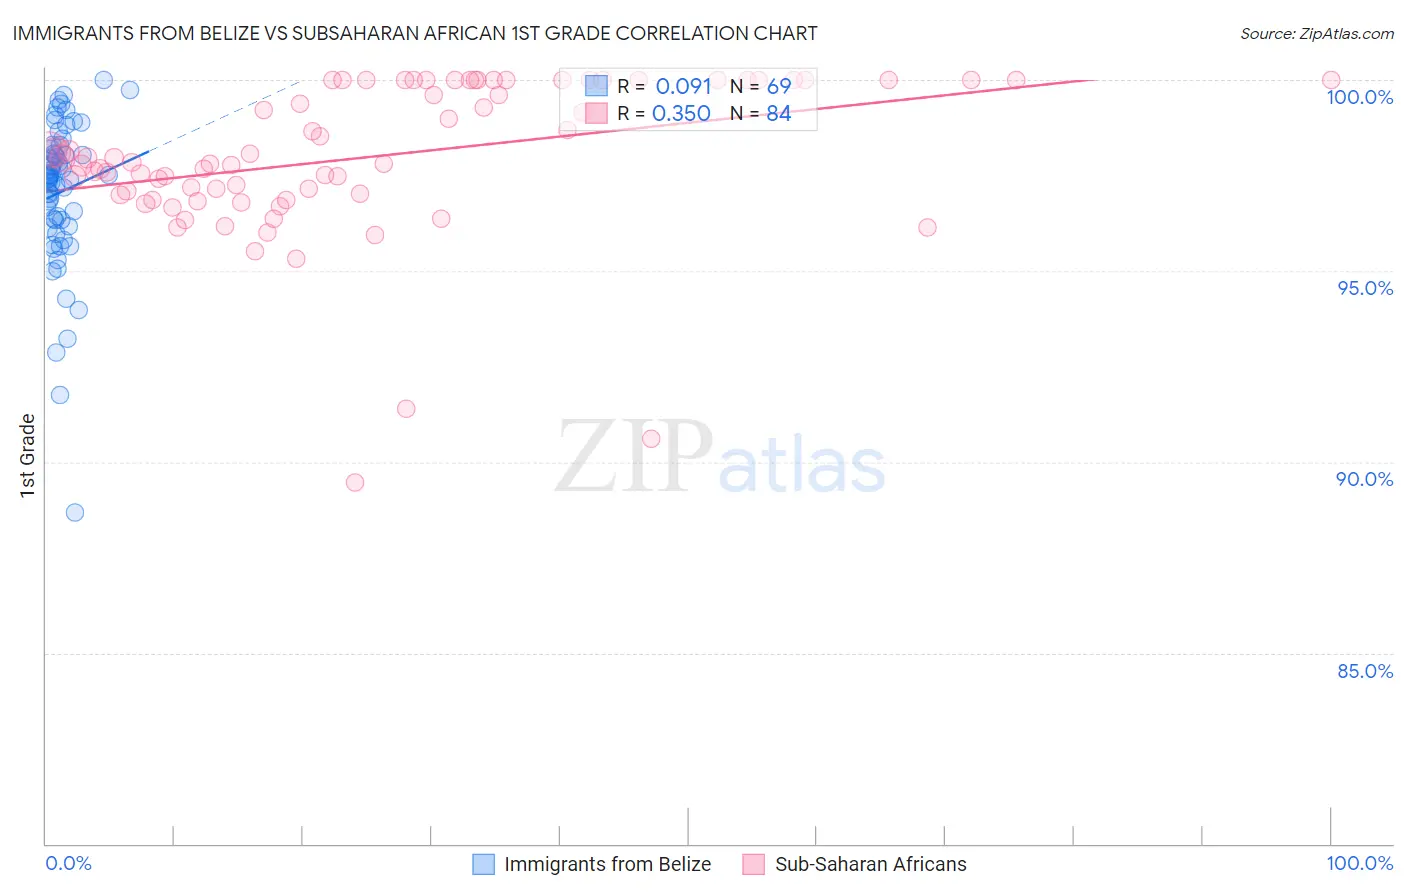 Immigrants from Belize vs Subsaharan African 1st Grade